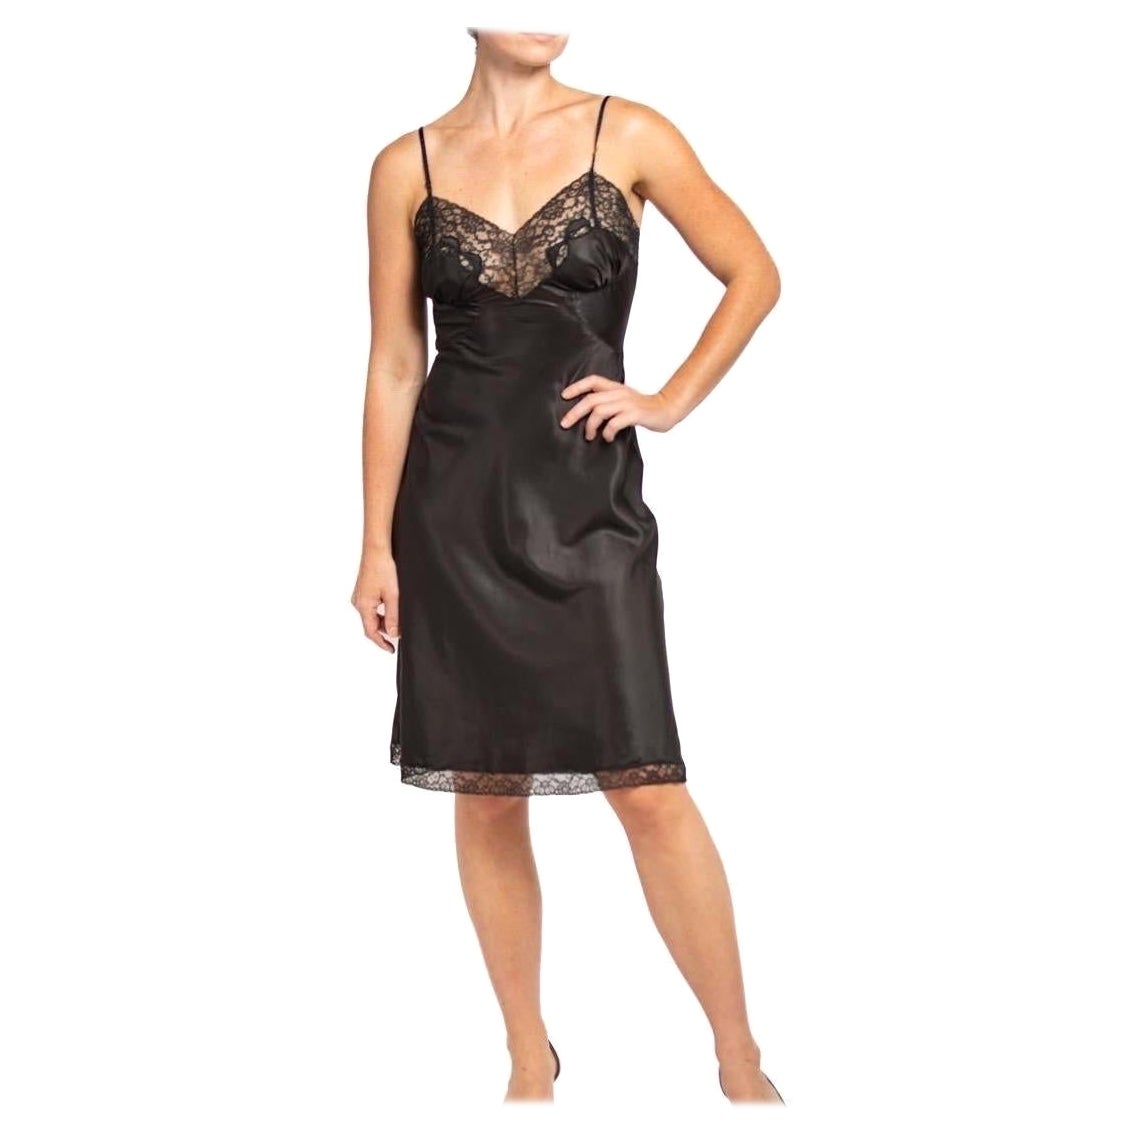 1950S Black Nylon Negligee With Lace Details For Sale